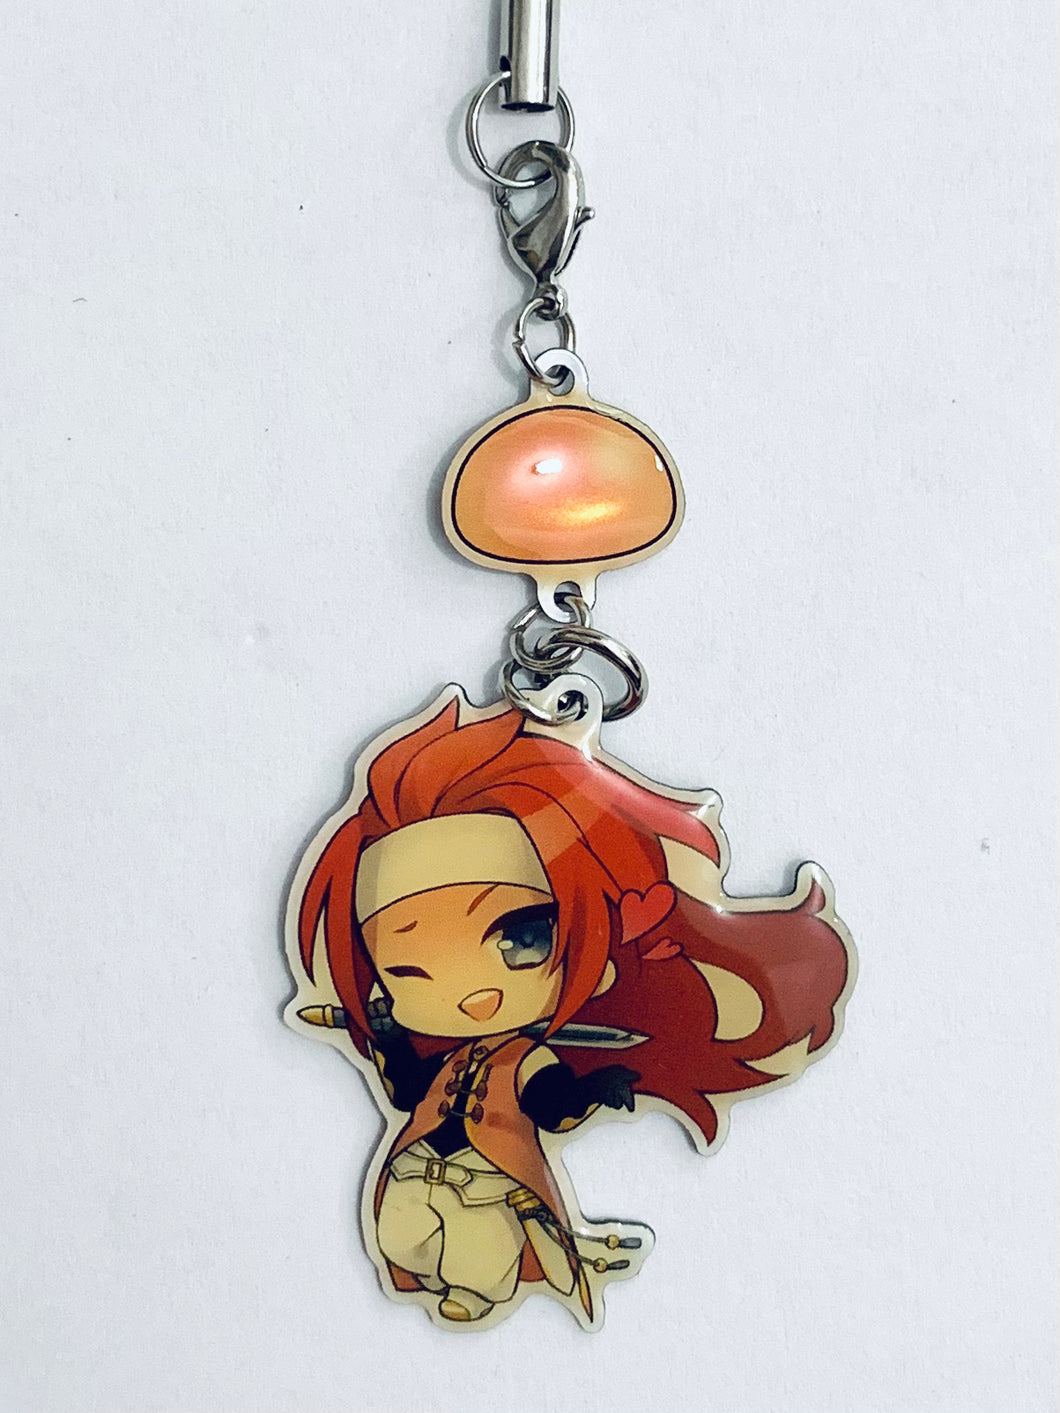 Tales of Symphonia - Zelos Wilder - TOS Yura-Yura Charm Collection